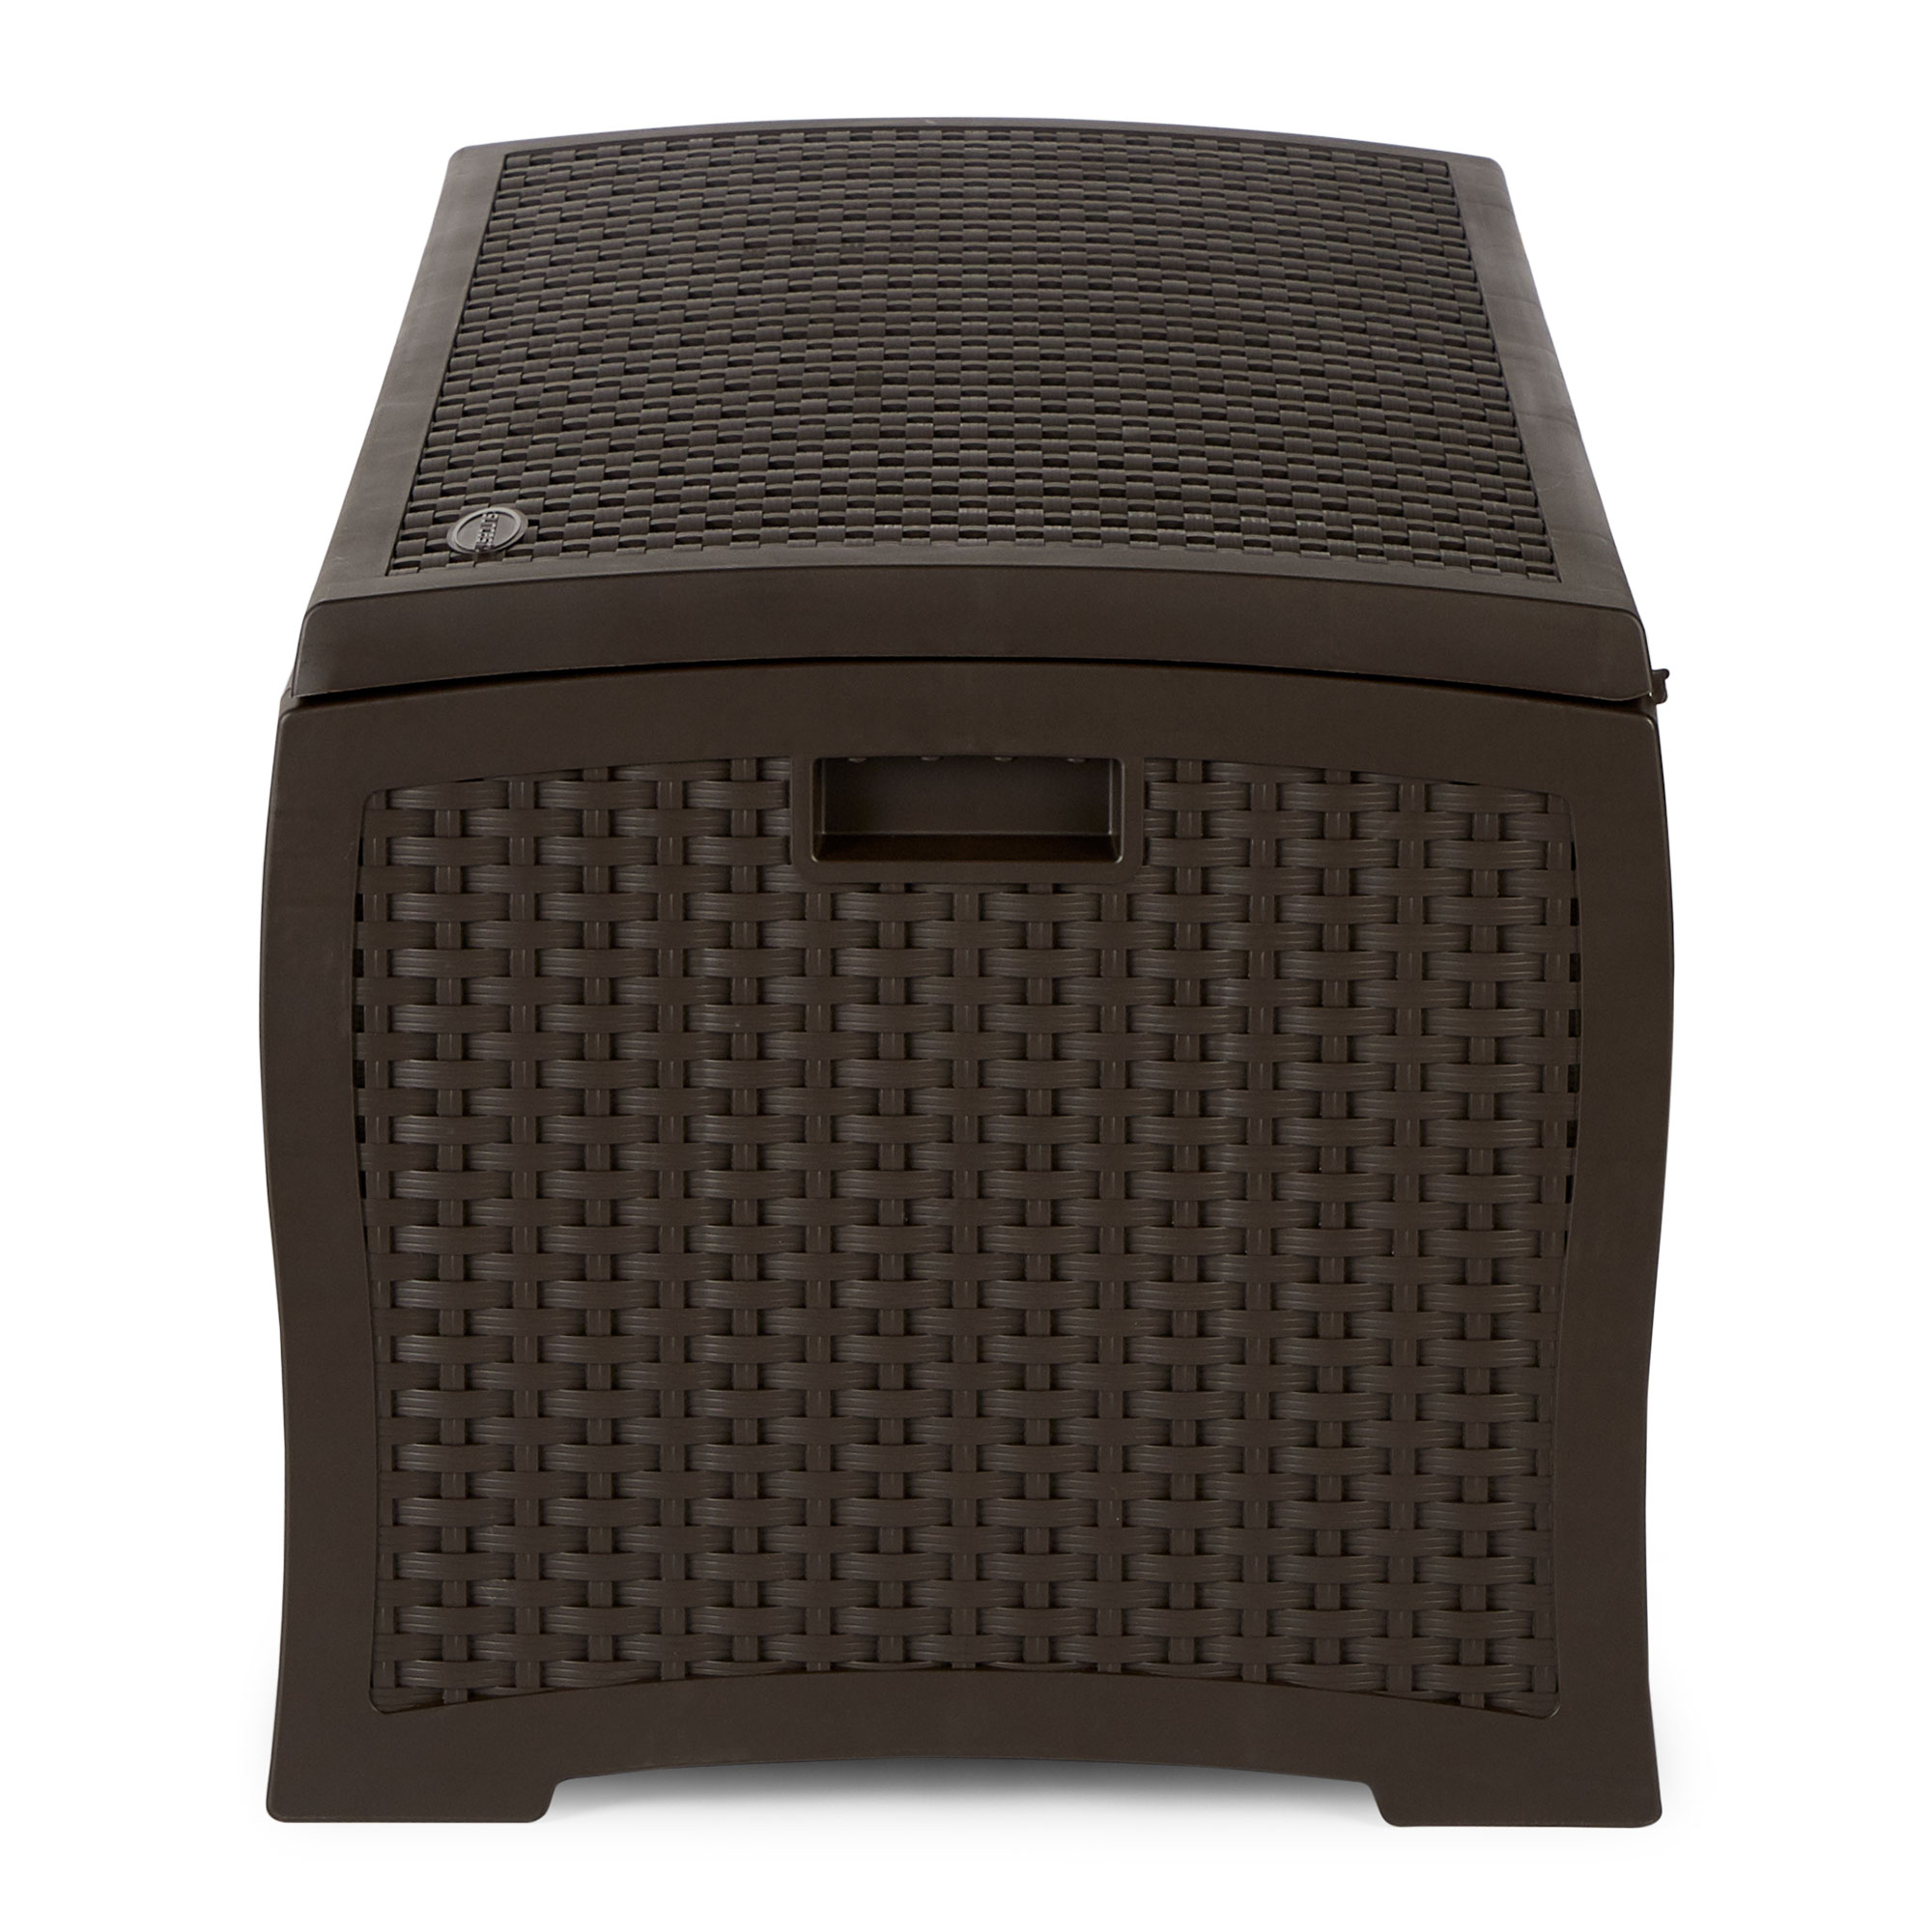 Suncast Indoor and Outdoor 73 Gallon Resin Deck Box with Seat, Mocha Brown, 46 in D x 22.5 in H x 21.6 in W - image 3 of 8